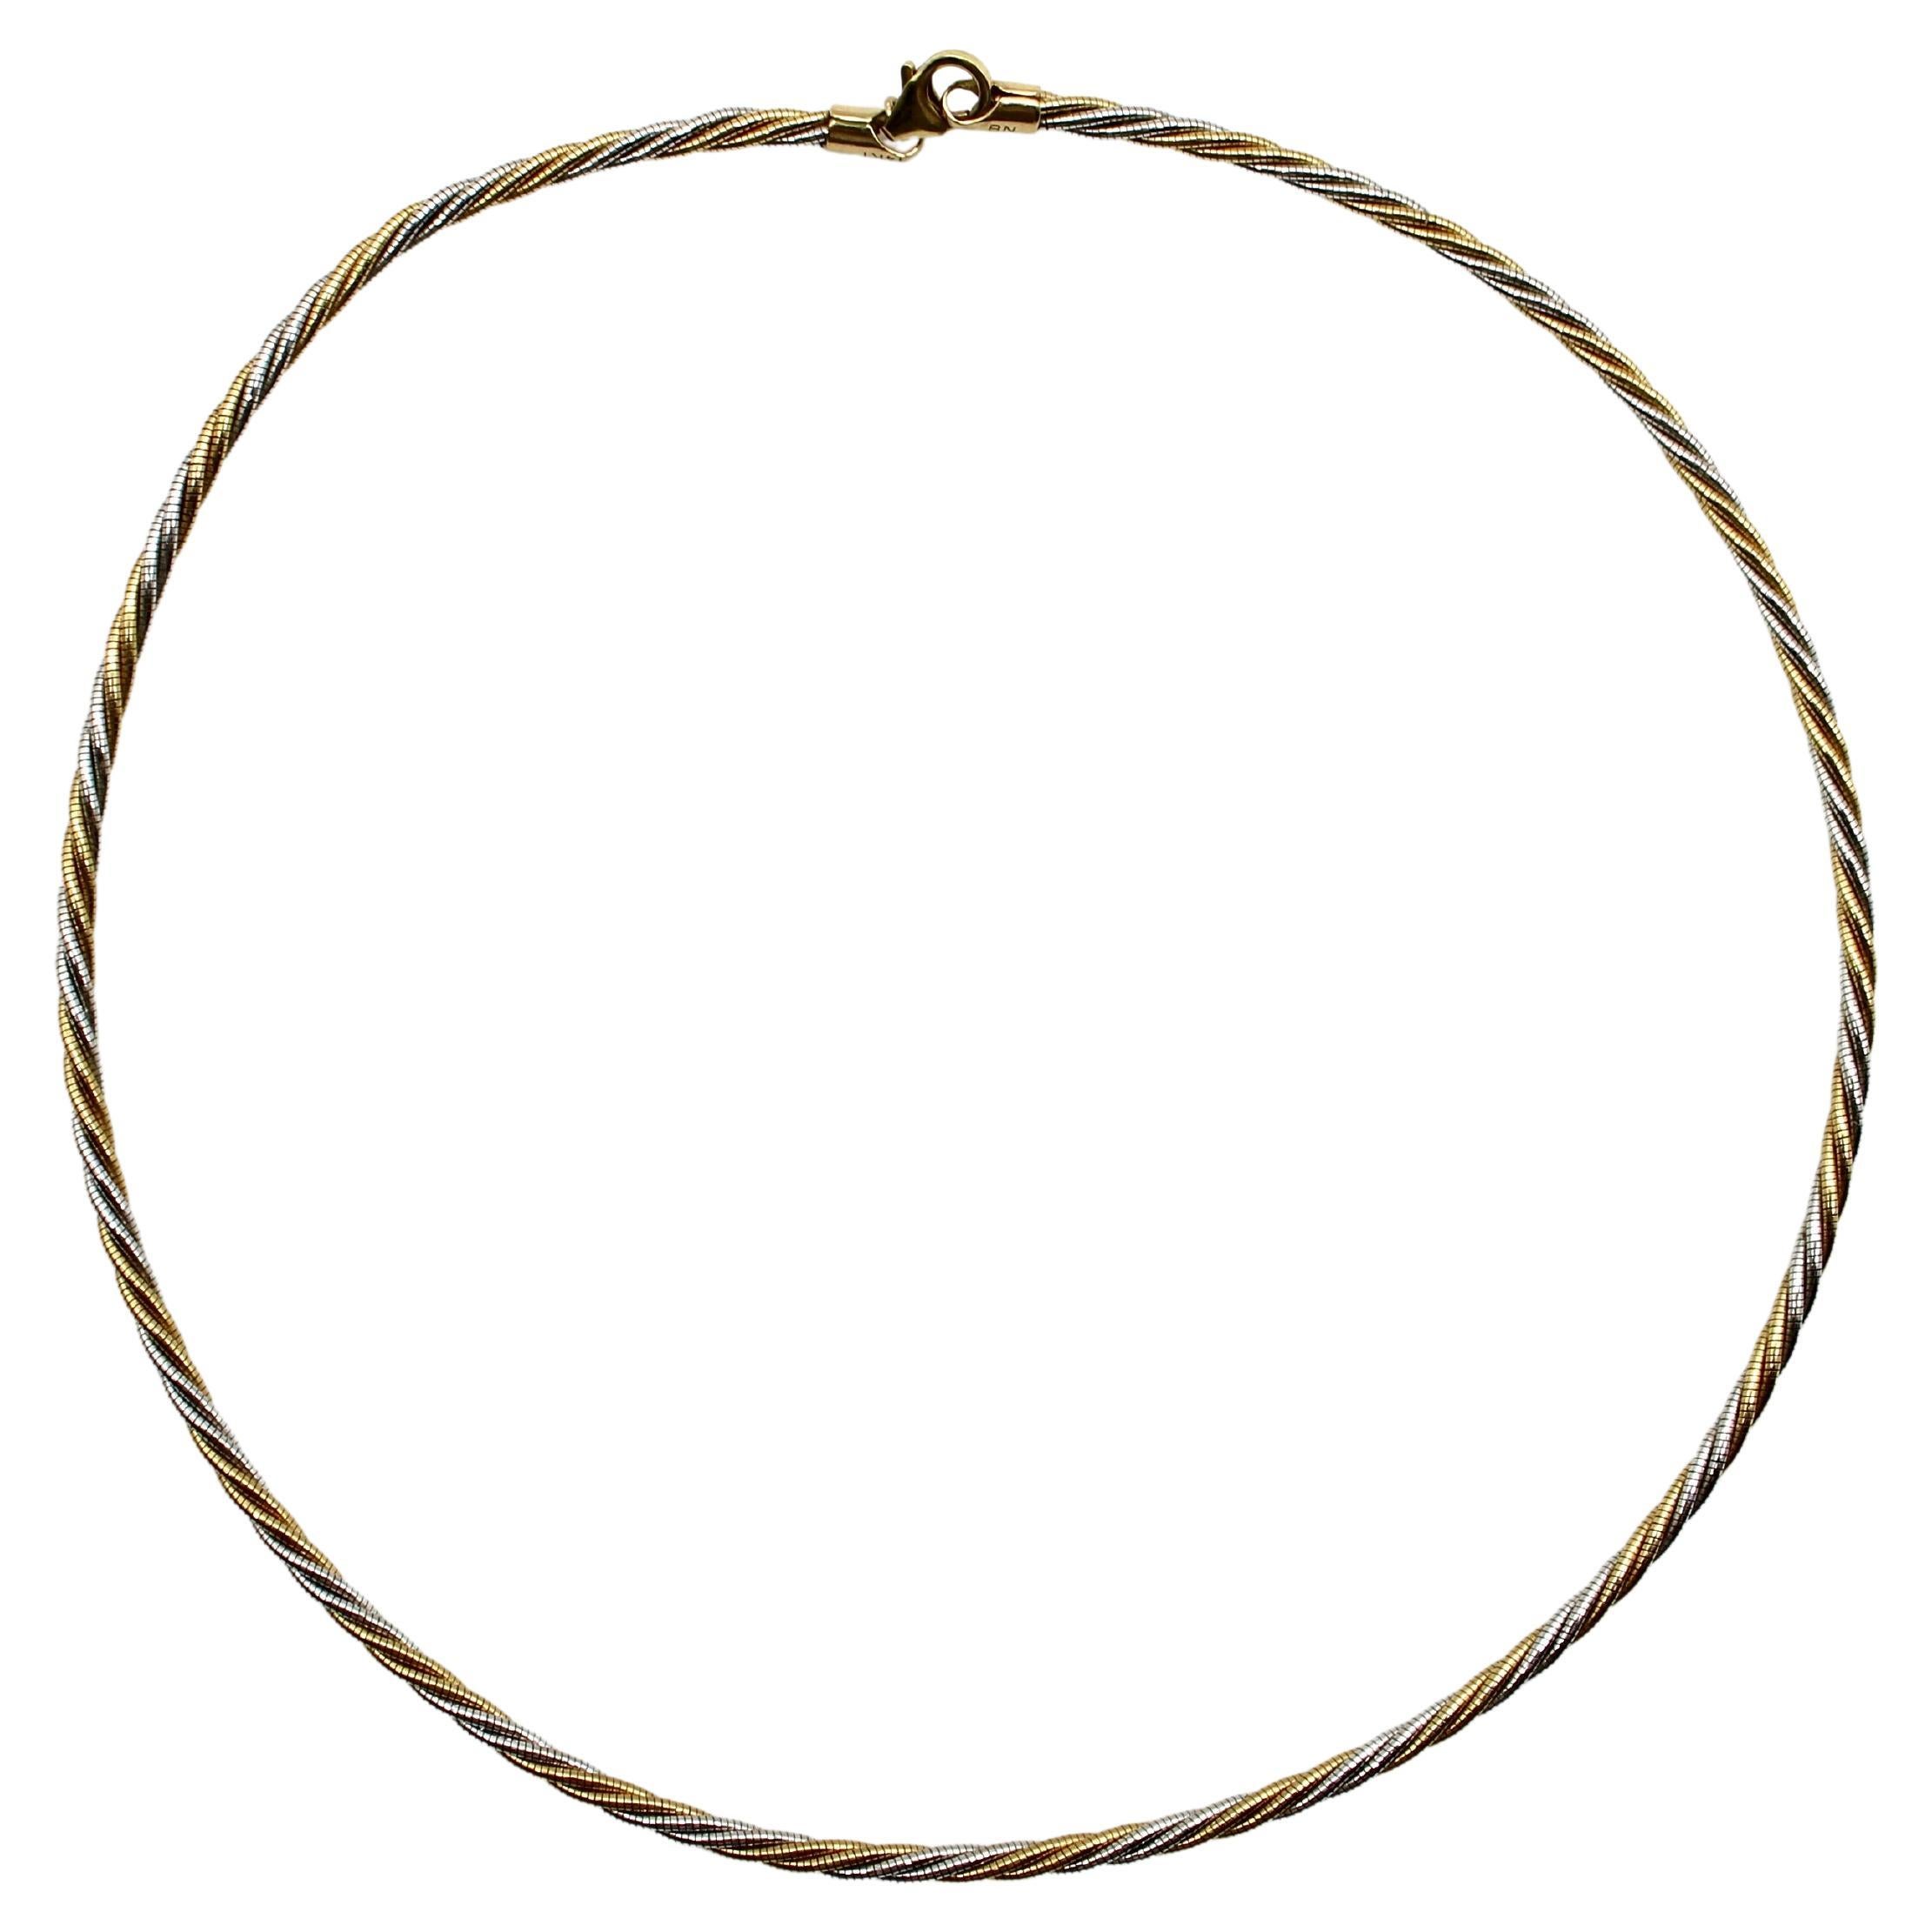 This elegant, Italian double twisted rope necklace is made of 14k yellow and white gold. The bi-color design on this necklace makes it versatile and gives this vintage piece a classic look. The necklace is nice and thick, with good presence,